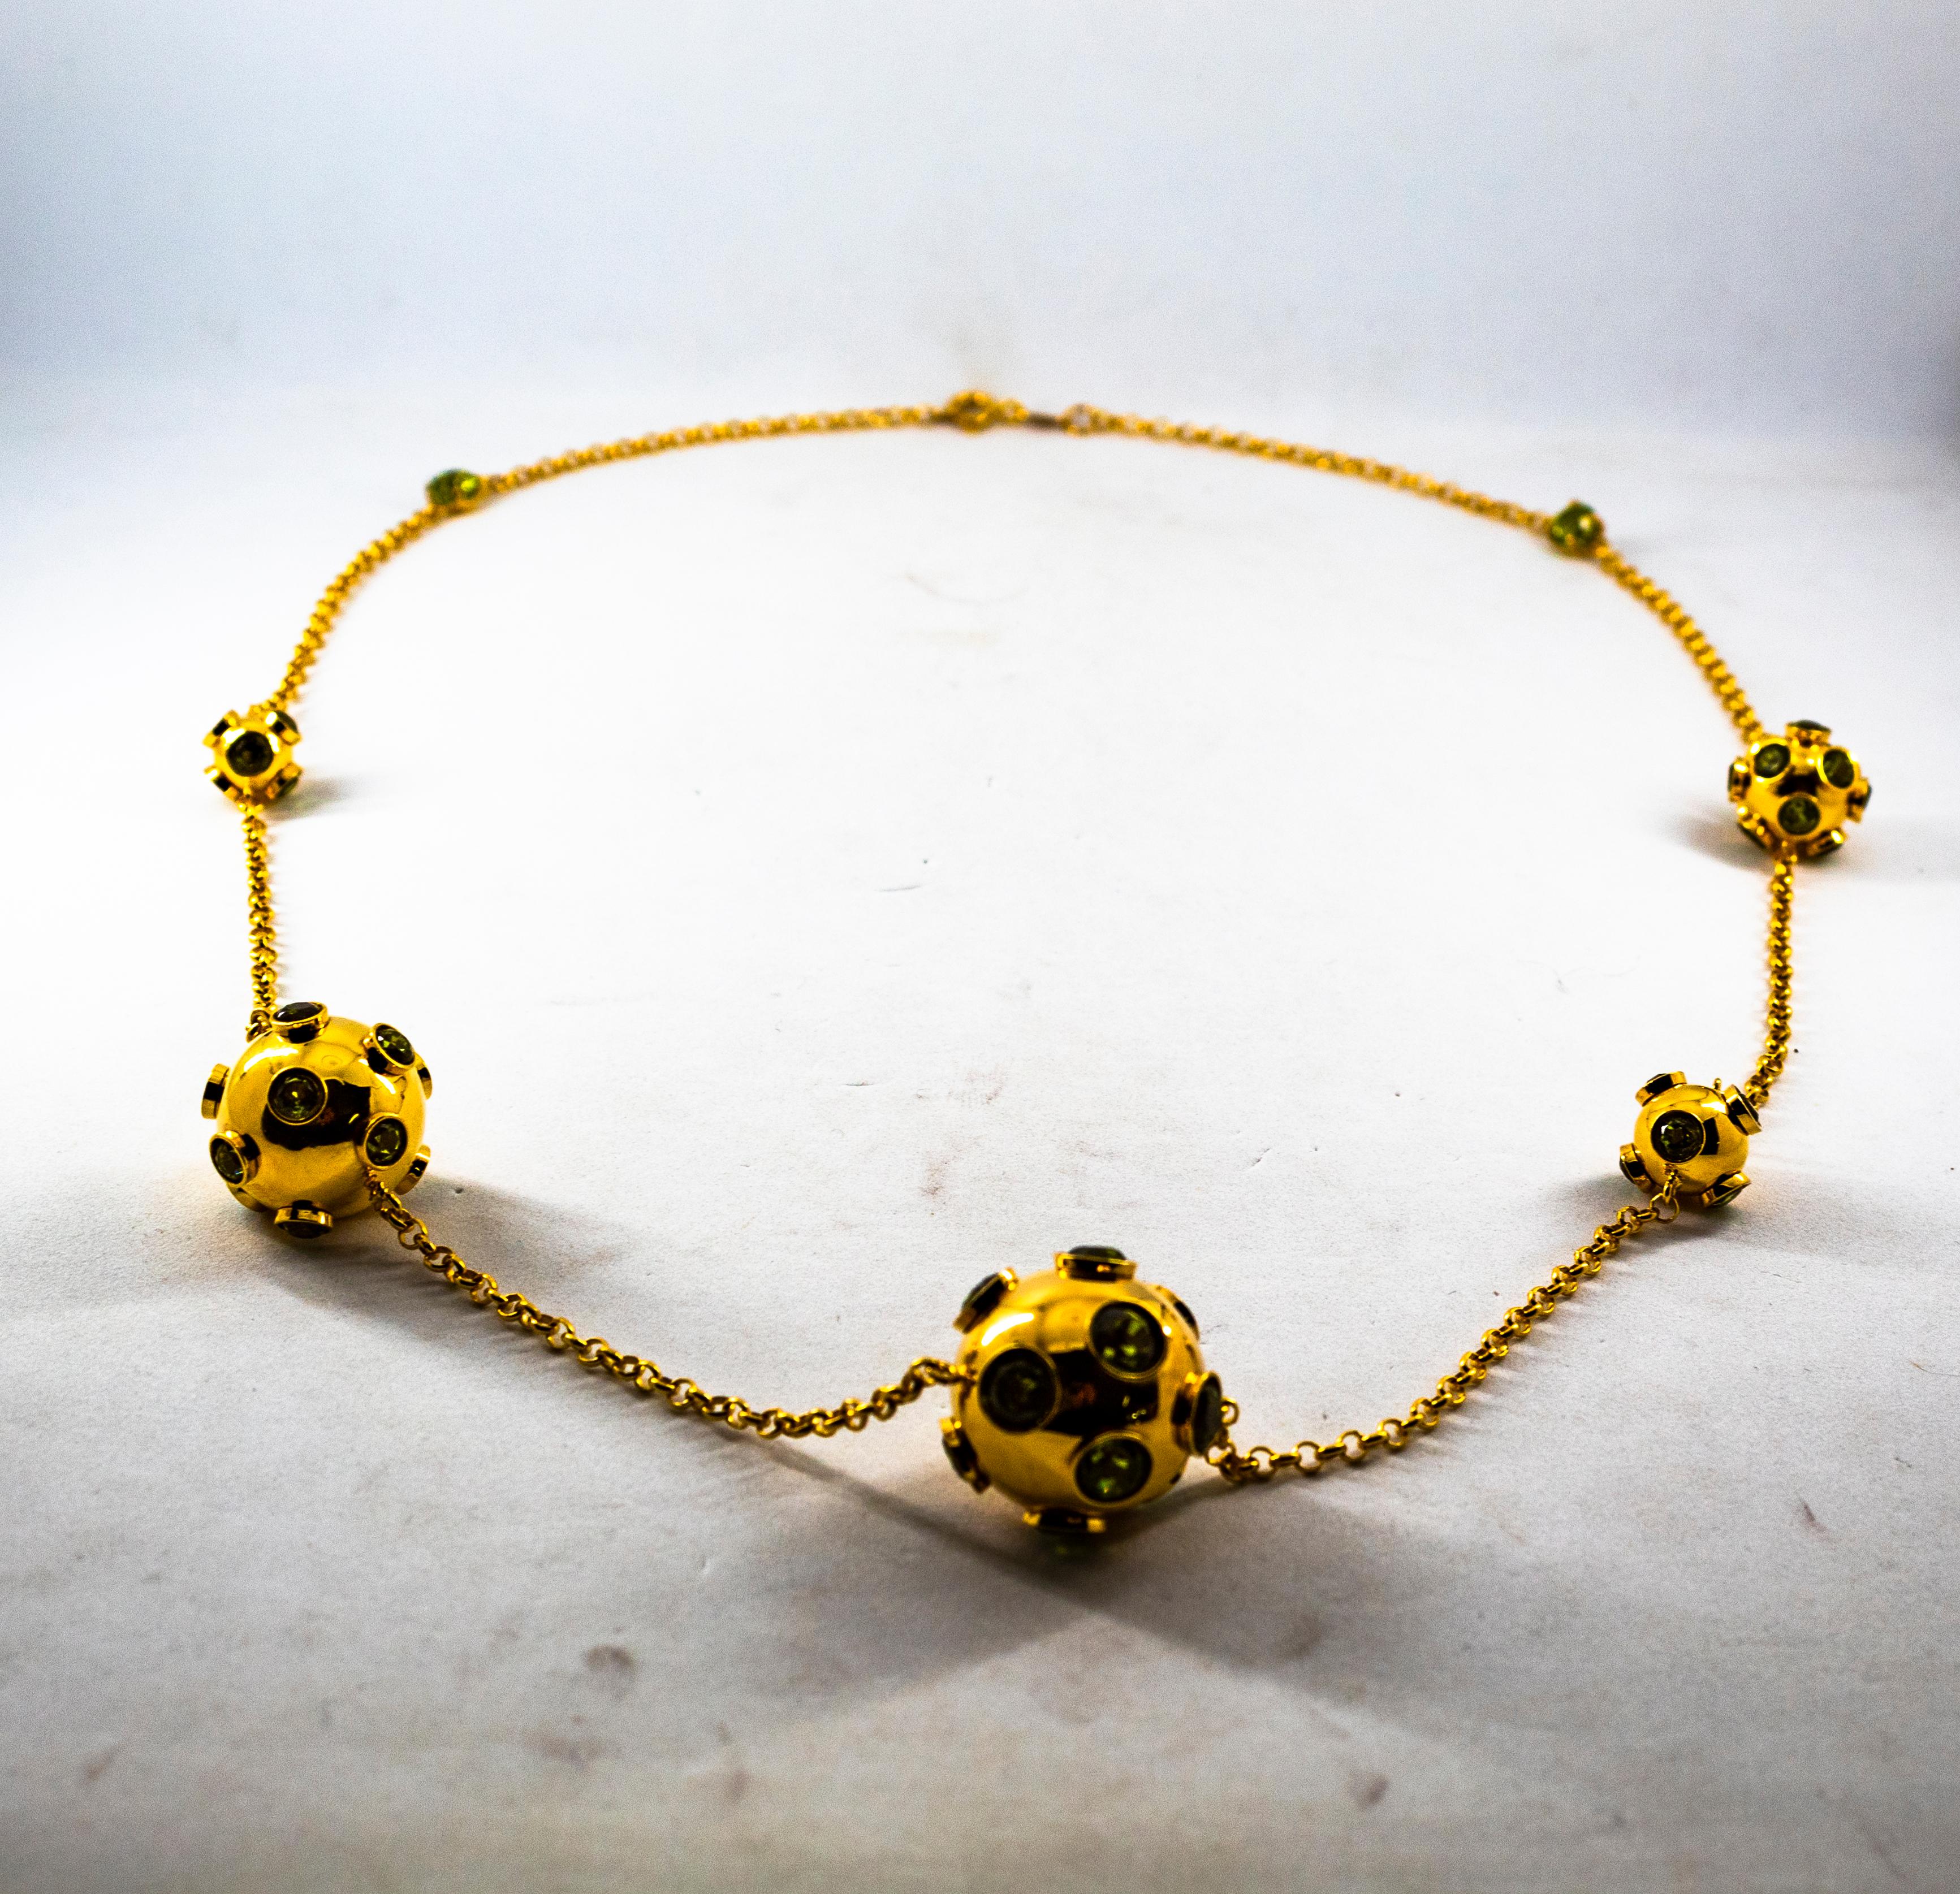 This Necklace is made of 9K Yellow Gold.
This Necklace has 30.50 Carats of Peridot.
This Necklace is inspired by Art Deco.

The Necklace Length is 68cm.

This Necklace is available also in a longer version.
This Necklace has also its matching